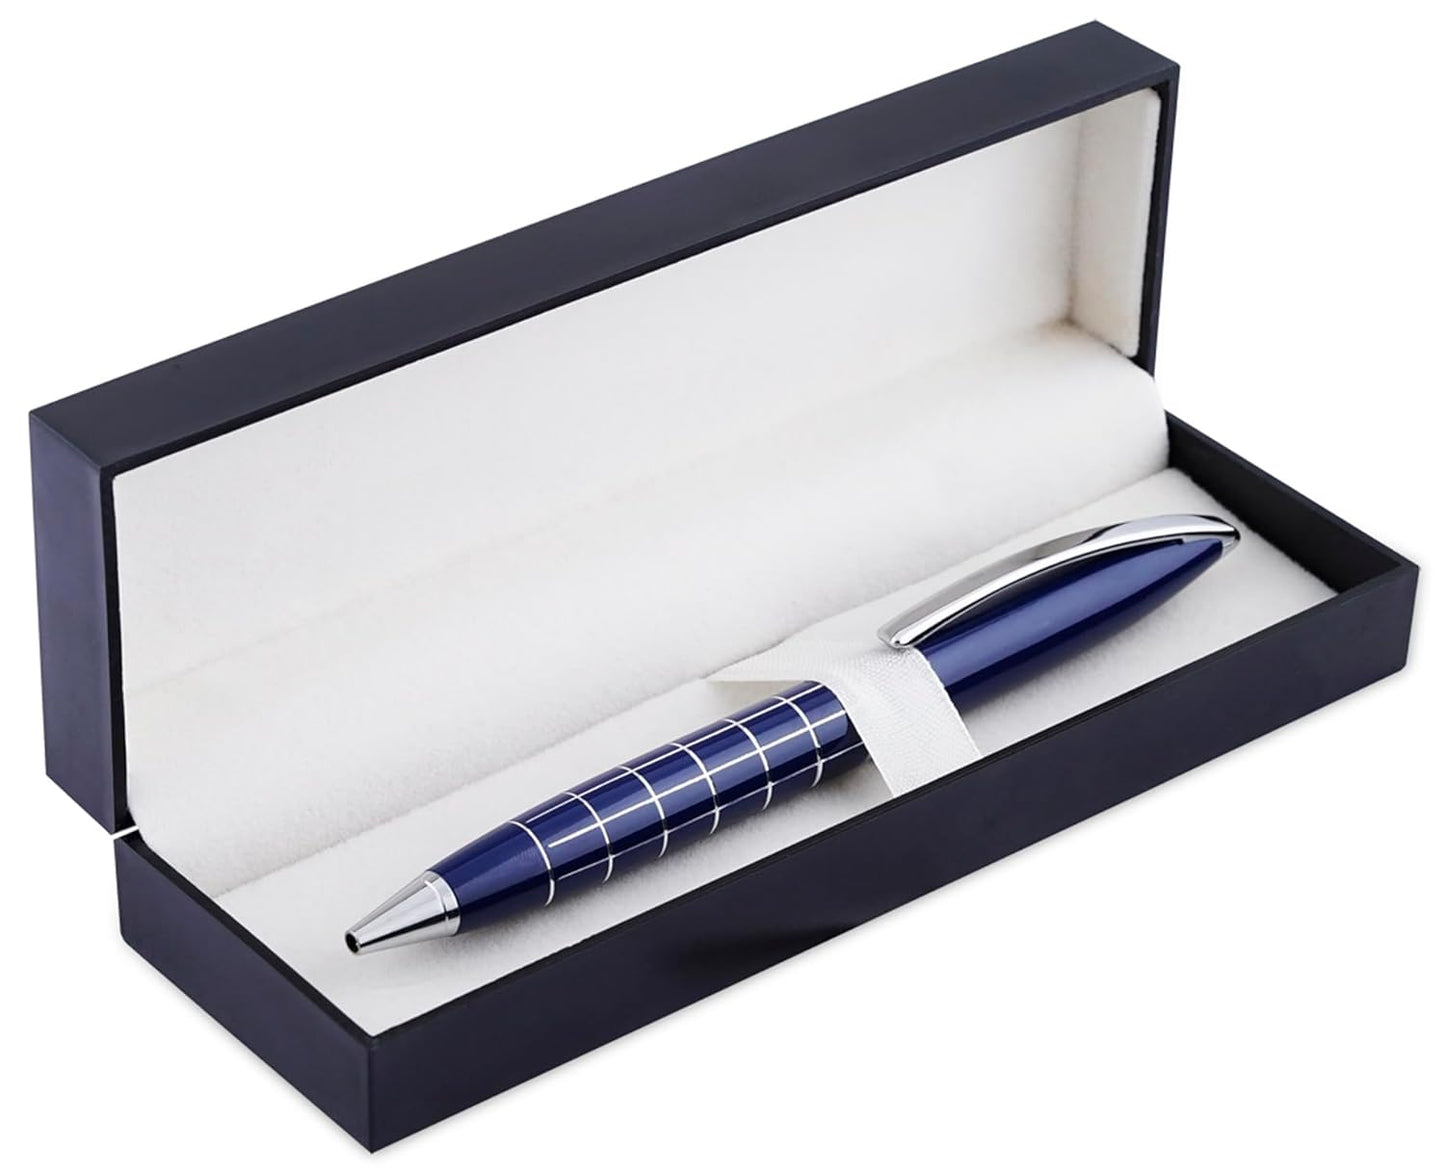 Premium Ballpoint Pen with Case for Office, Home and Gifting (Blue Body, Blue Ink)